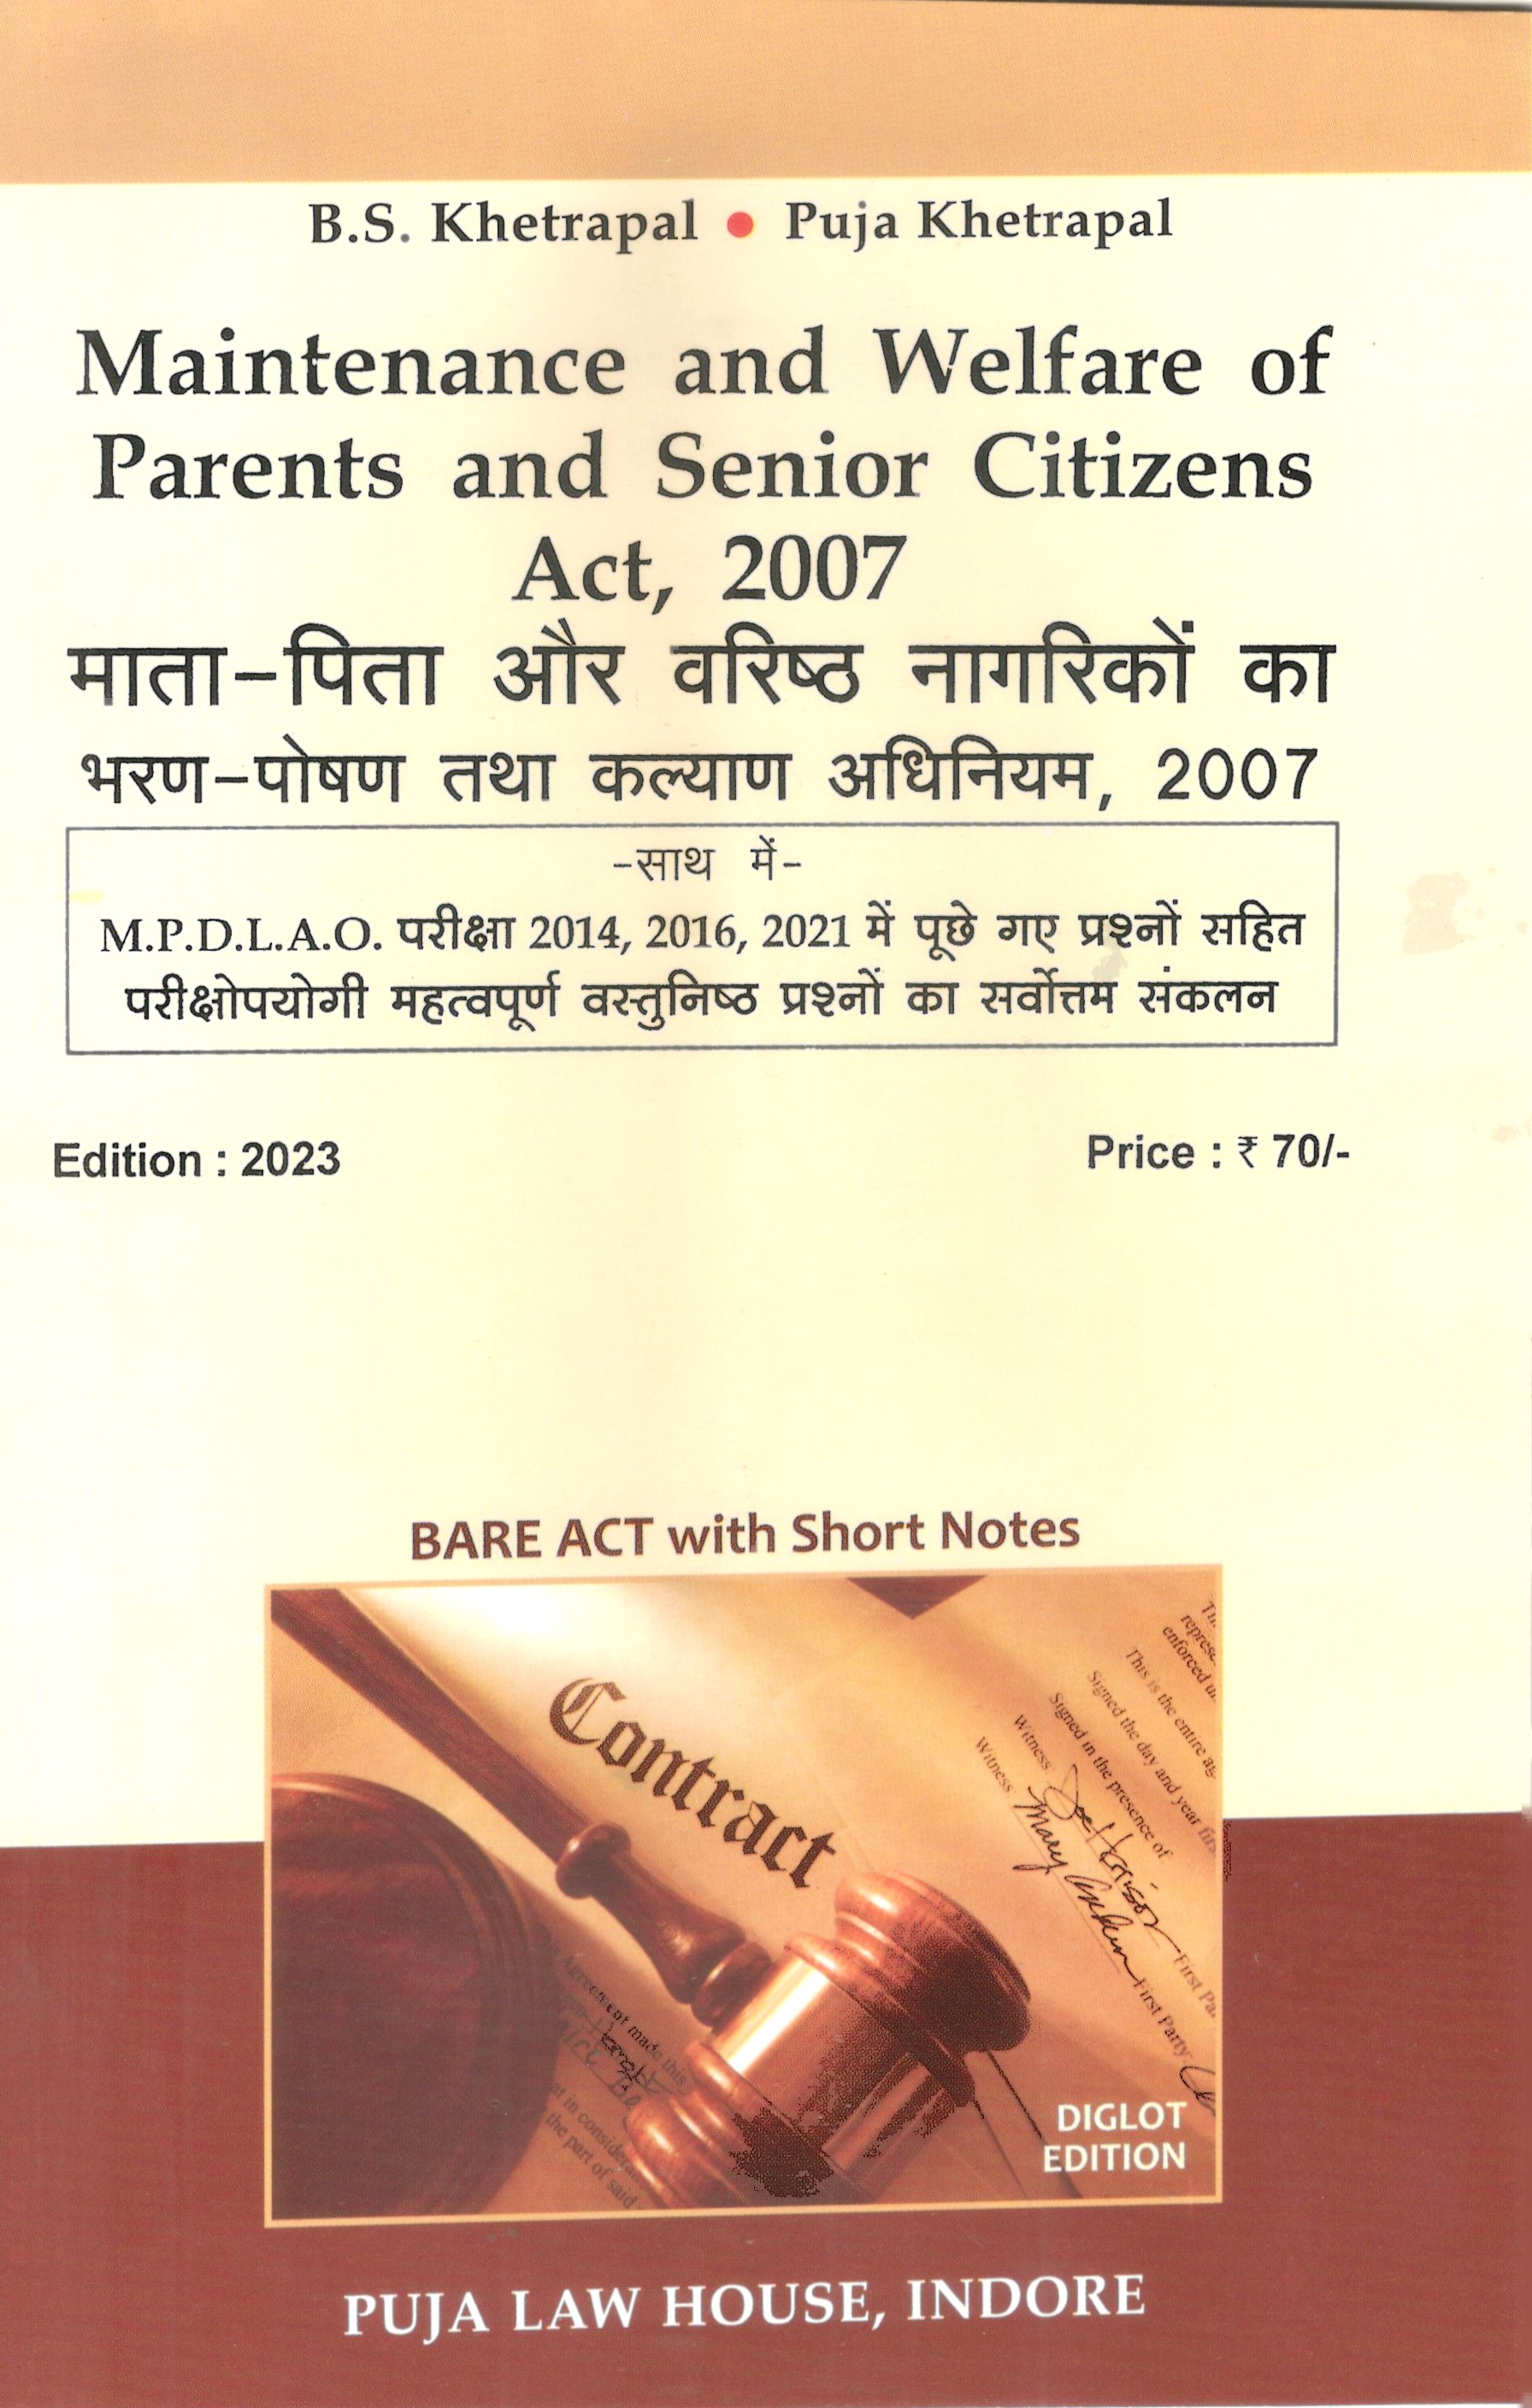 Maintenance and Welfare of Parents and Senior Citizens Act, 2007 / माता-पिता और वरिष्ठ नागरिकों का भरण-पोषण तथा कल्याण अधिनियम, 2007